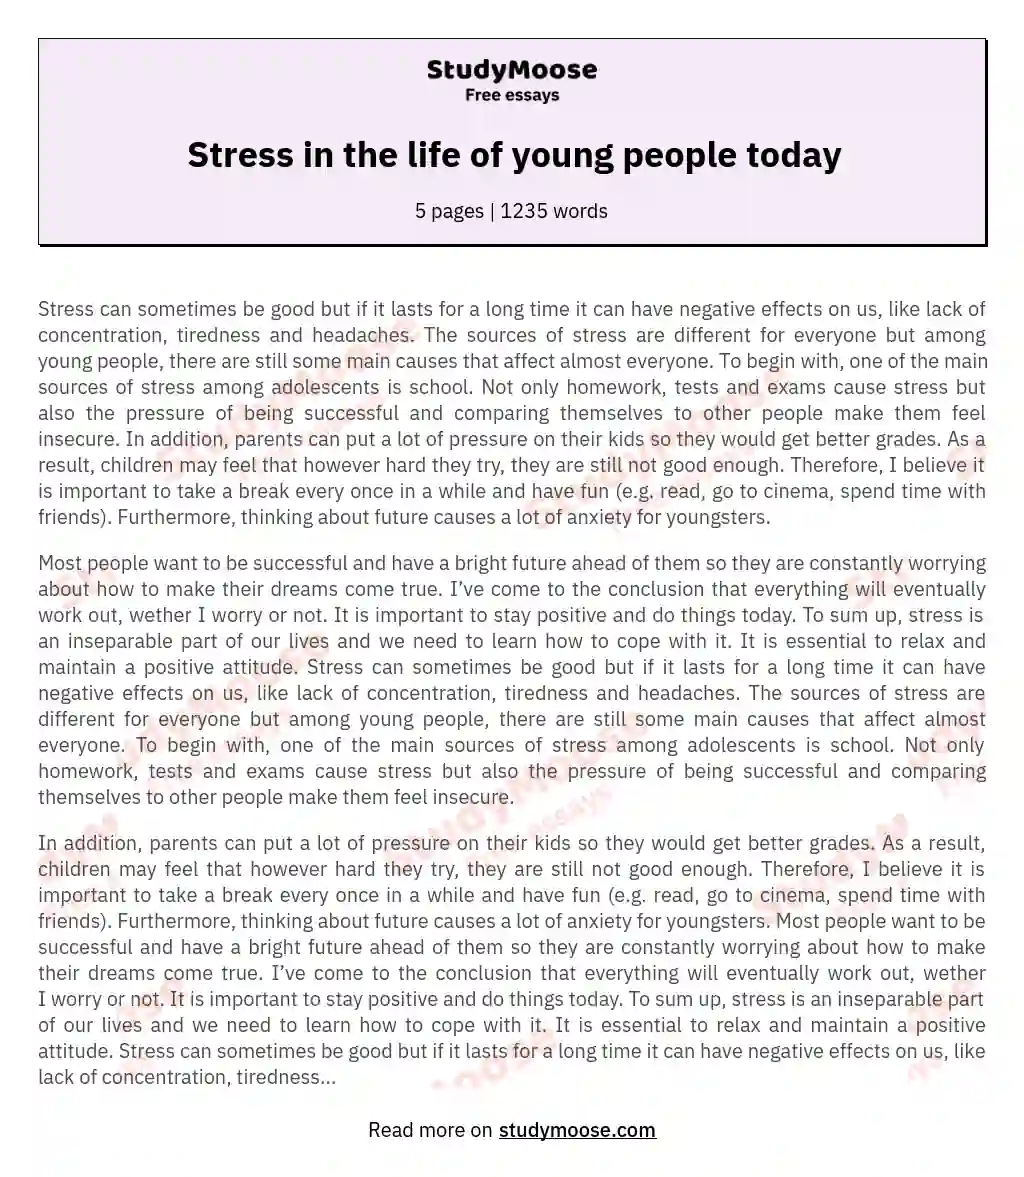 Stress in the life of young people today essay